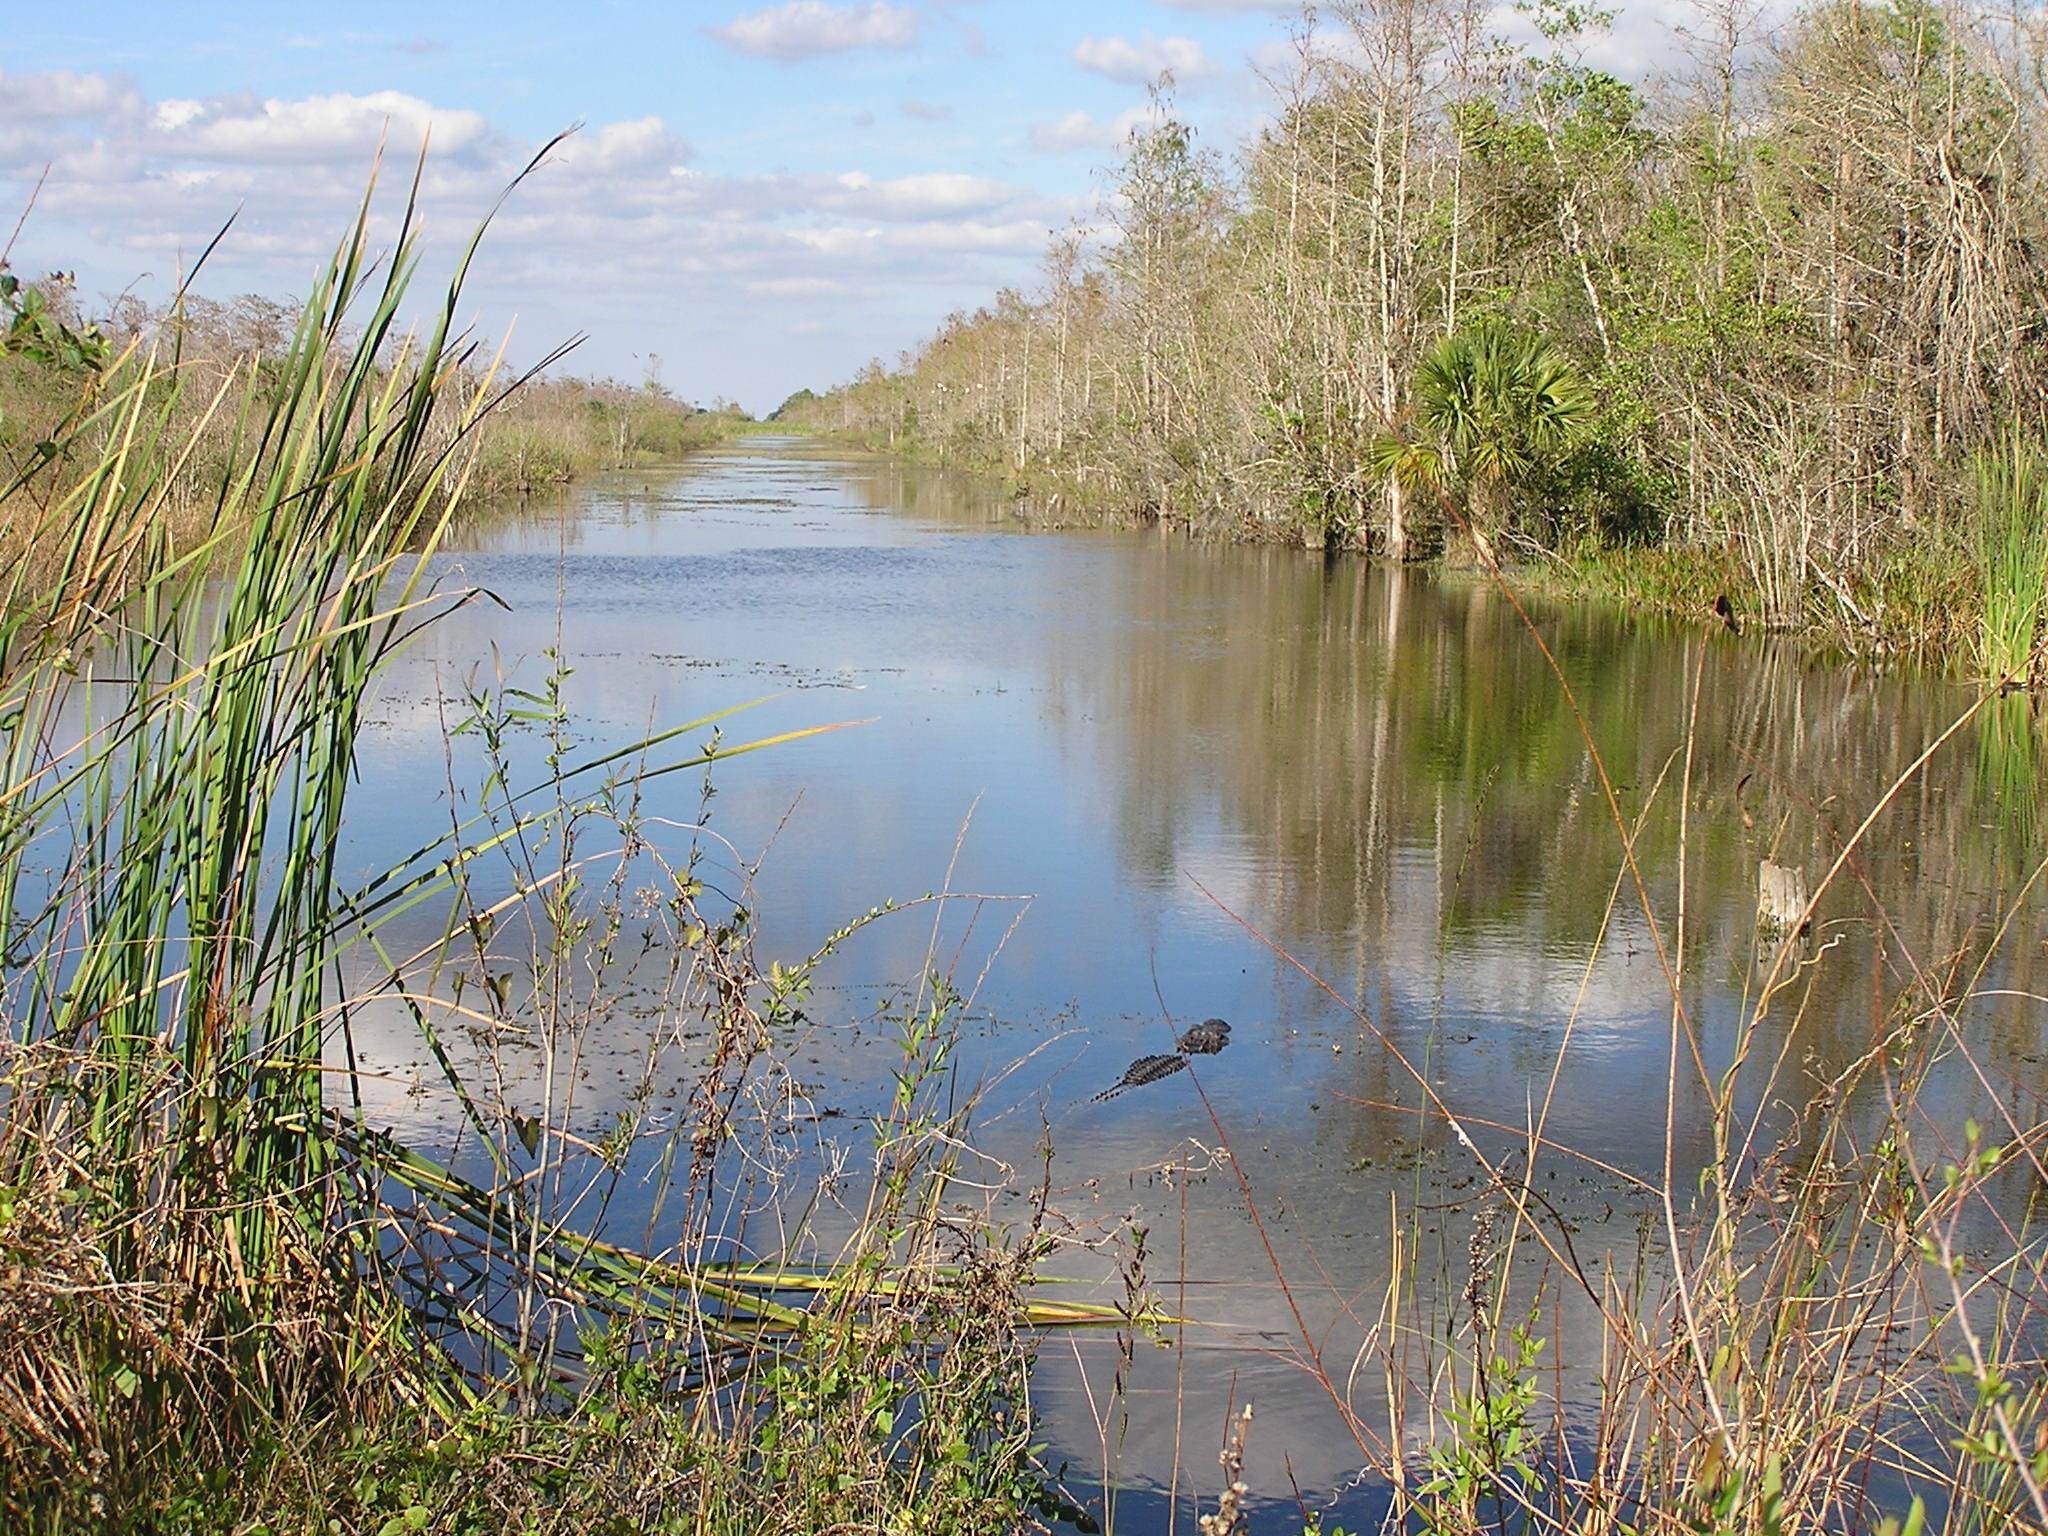 Canal with alligator in the foreground and vegetation along both sides